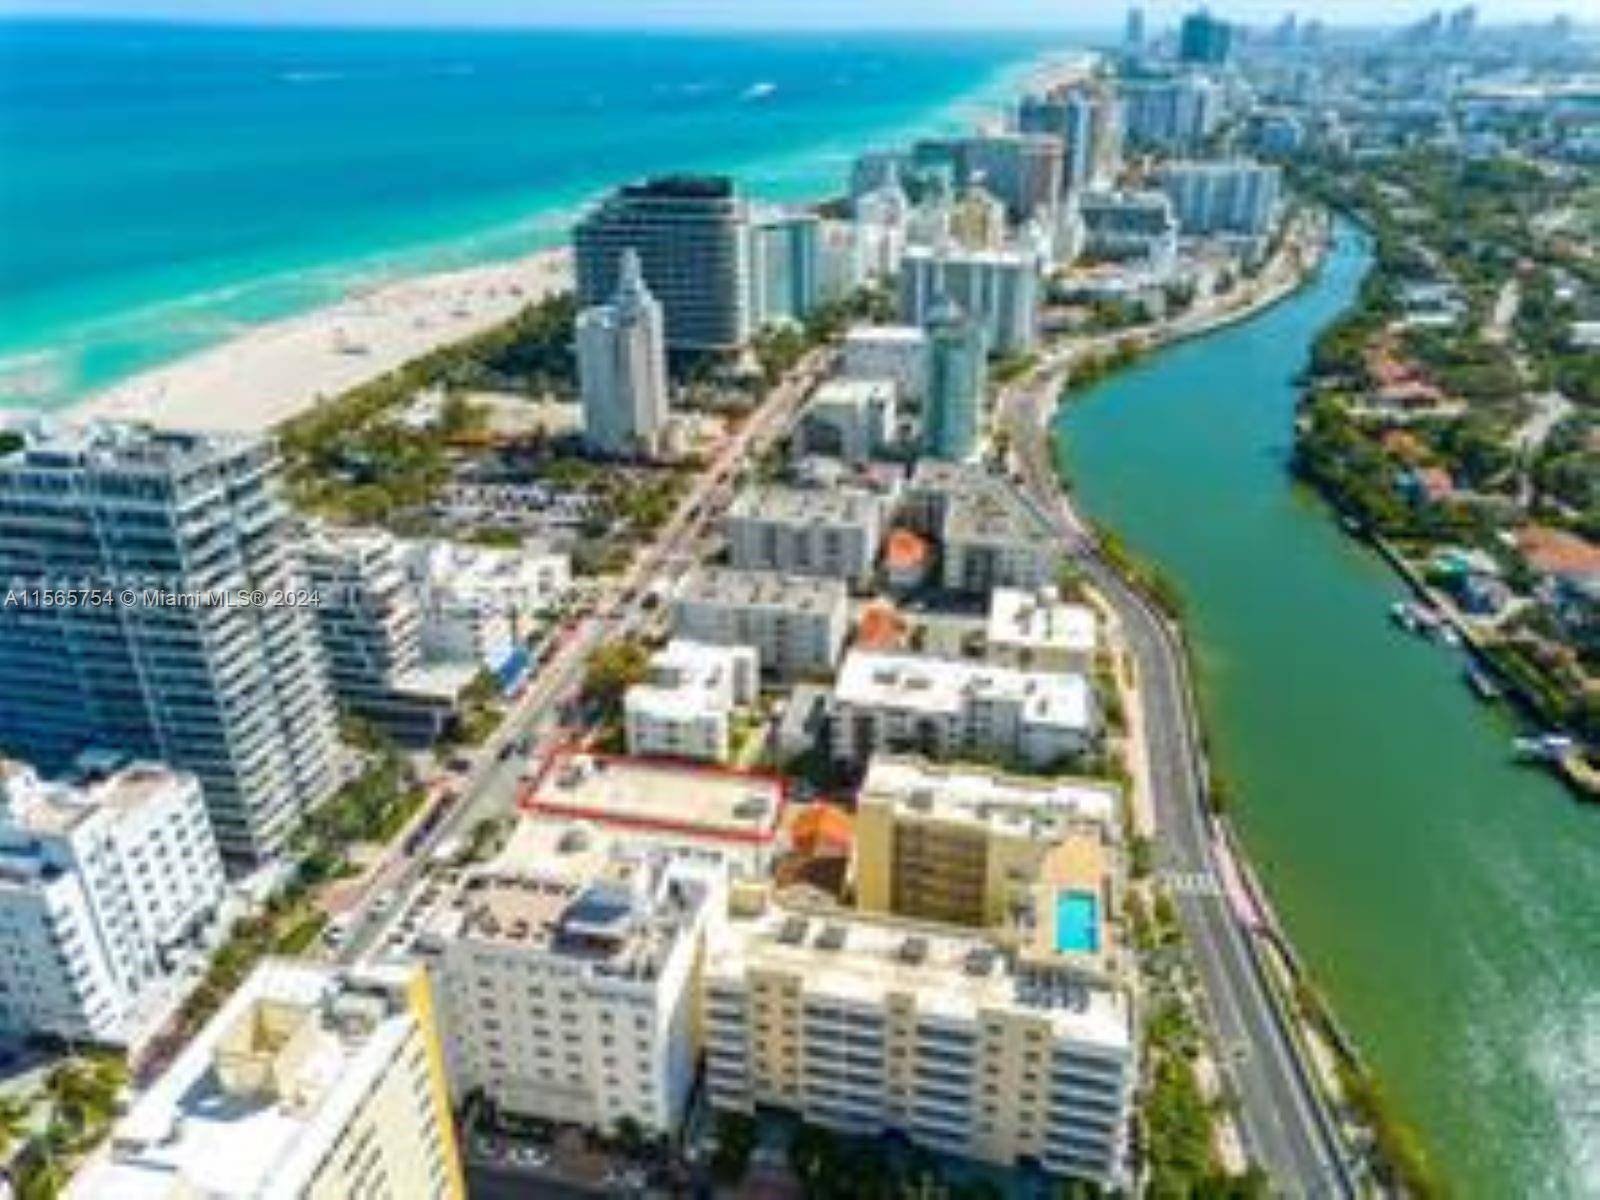 ! ! GREAT SHORT TERM RENTALS AND AIRB B ALLOWED APARTMENT LOCATED AT THE FAENA DISTRICT AREA OF MIAMI BEACH !